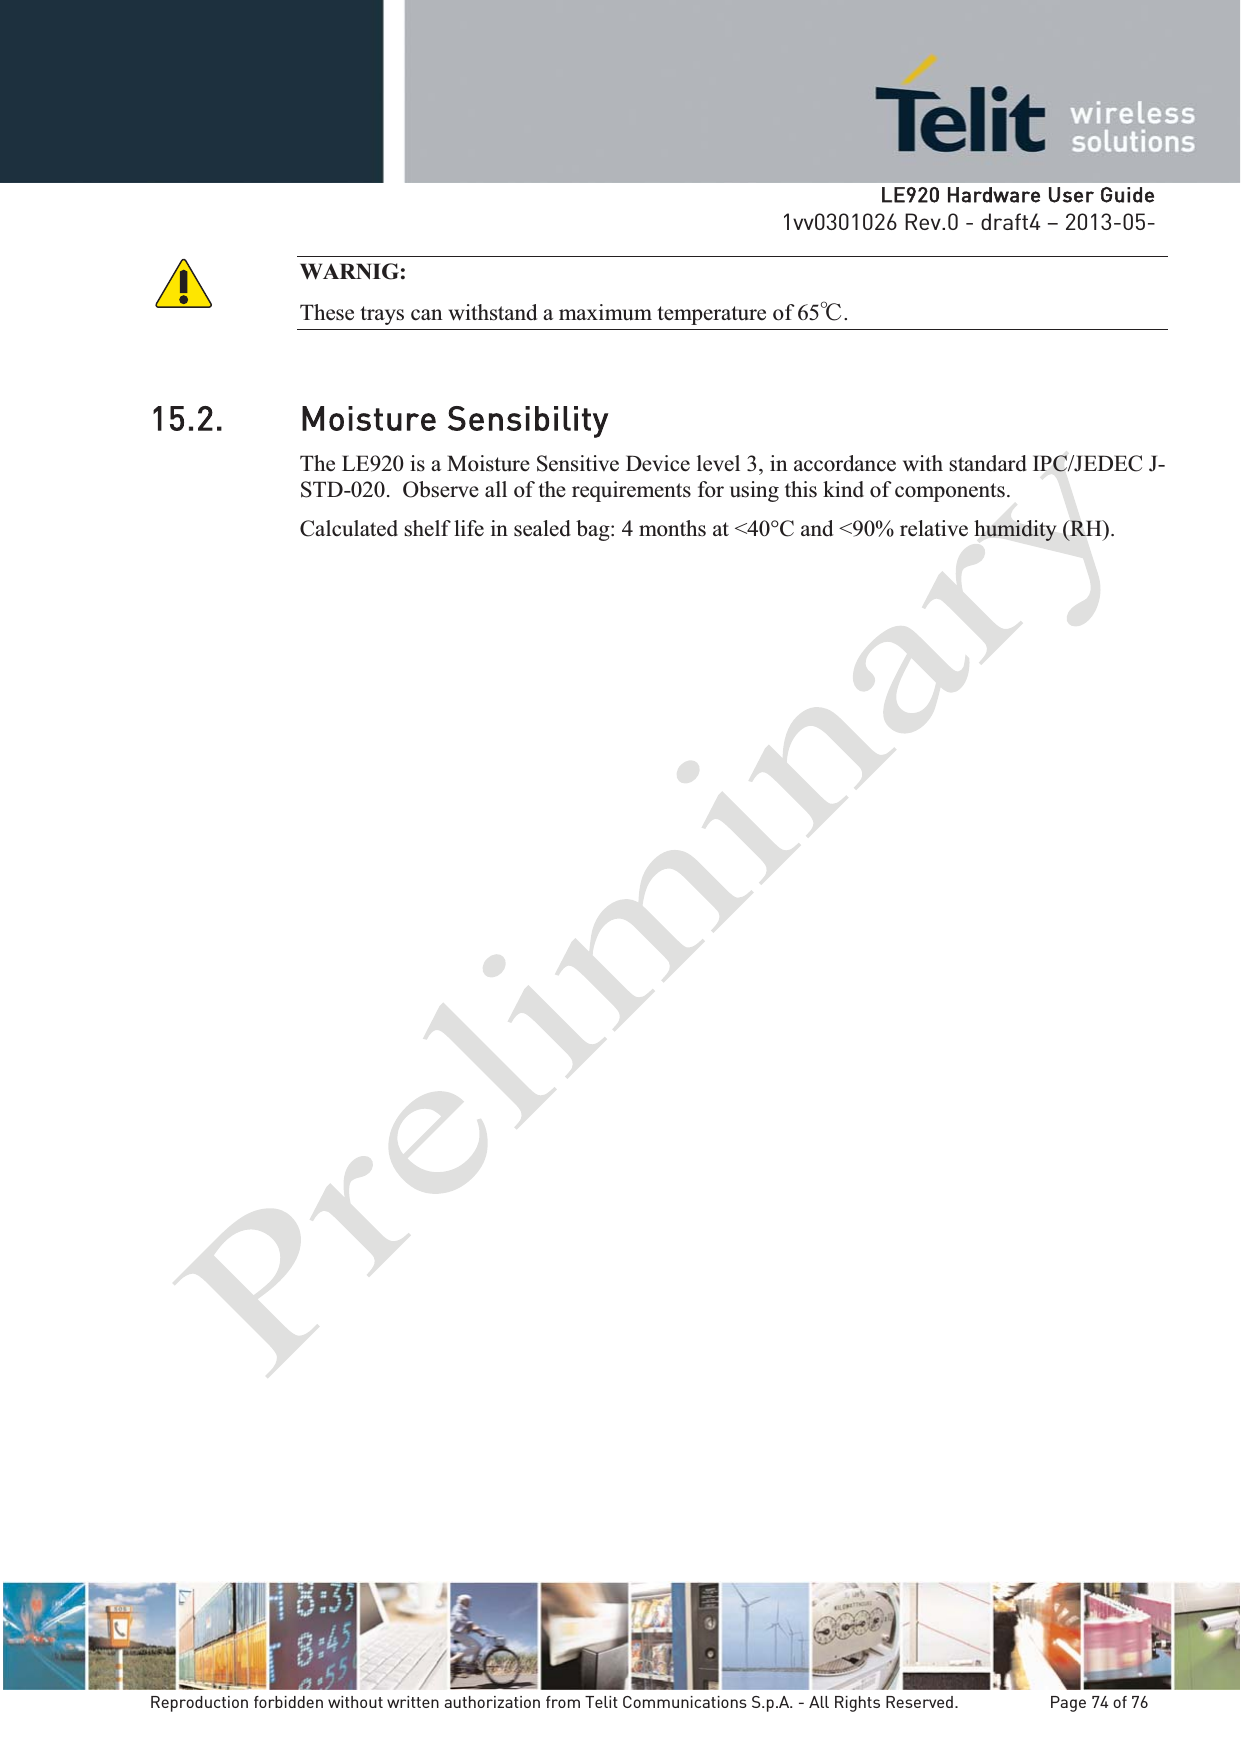   LLE920 Hardware User Guide1vv0301026 Rev.0 - draft4 – 2013-05-Reproduction forbidden without written authorization from Telit Communications S.p.A. - All Rights Reserved.    Page 74 of 76 WARNIG:  These trays can withstand a maximum temperature of 65͠.  15.2. Moisture Sensibility The LE920 is a Moisture Sensitive Device level 3, in accordance with standard IPC/JEDEC J-STD-020.  Observe all of the requirements for using this kind of components. Calculated shelf life in sealed bag: 4 months at &lt;40°C and &lt;90% relative humidity (RH).  